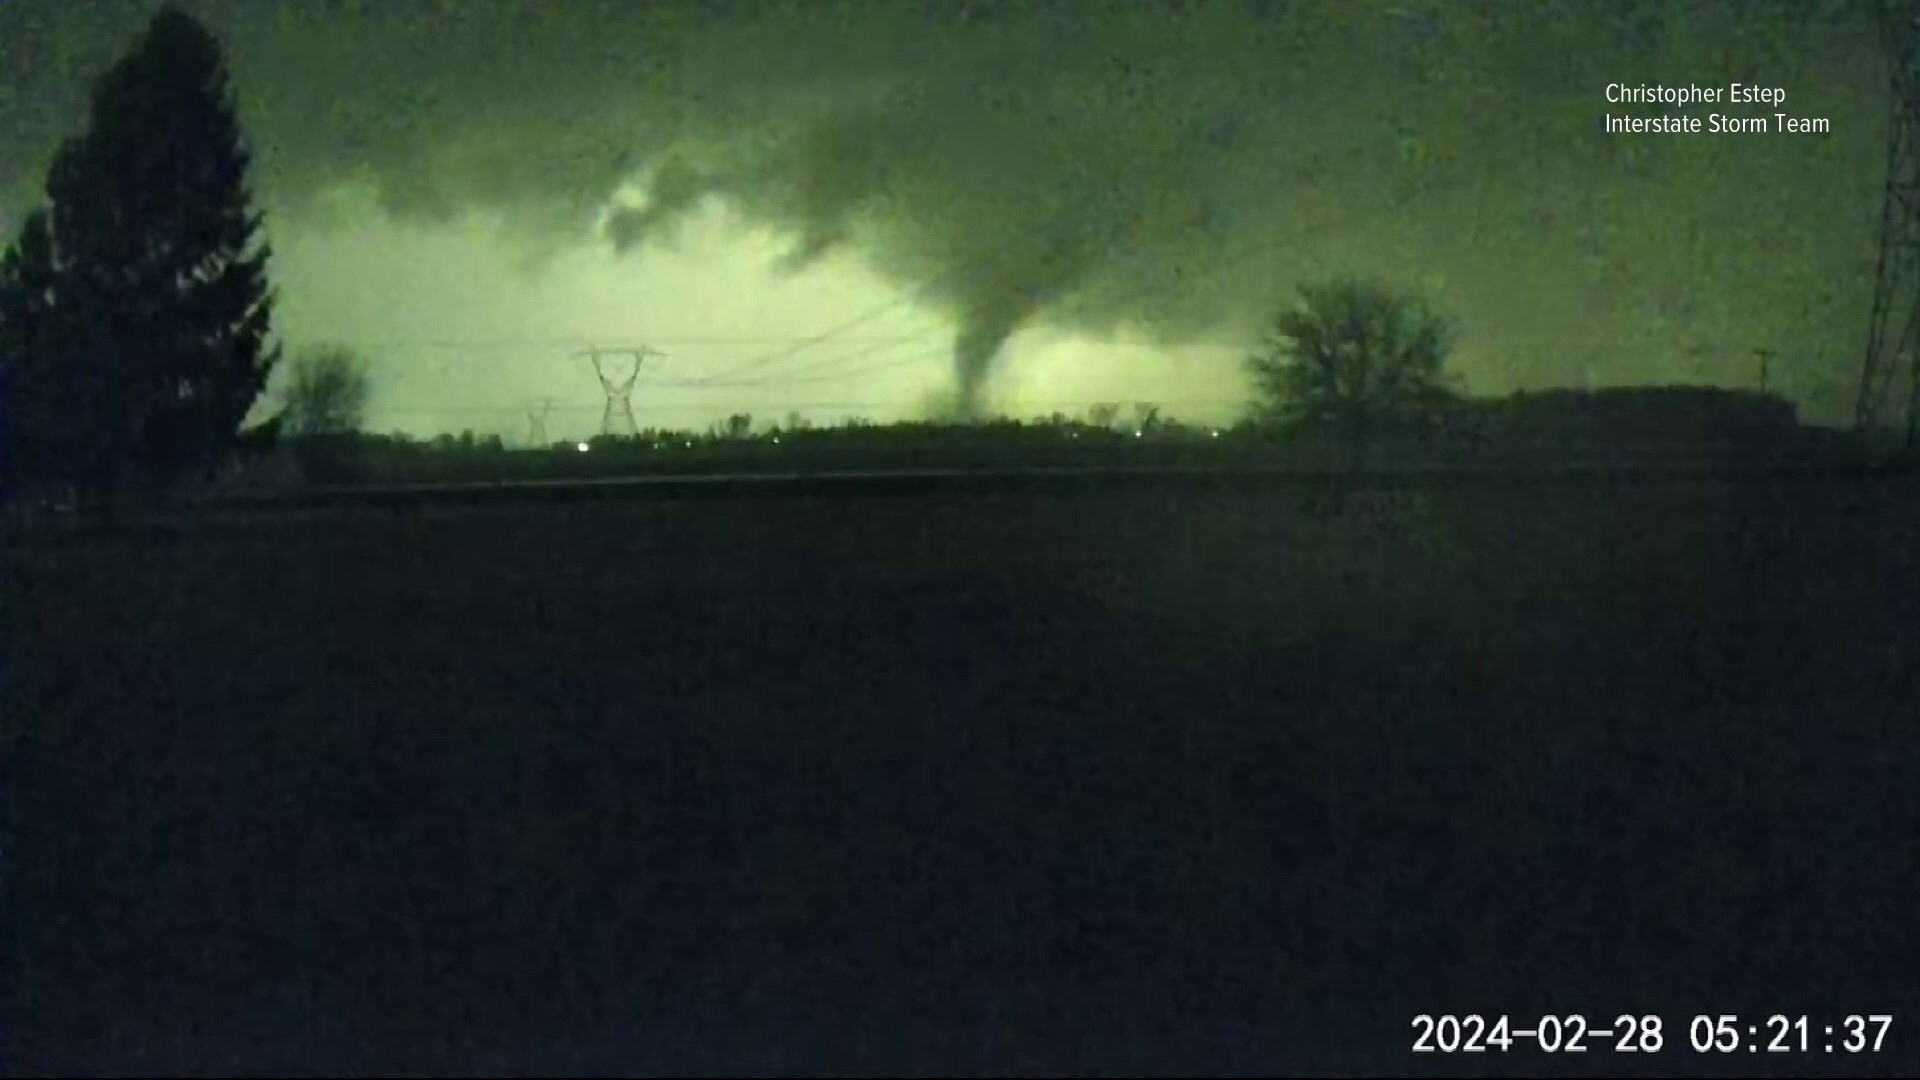 The video shows the tornado moving through a field near Chris Estep's home on Lilly Chapel Georgesville Road in London.